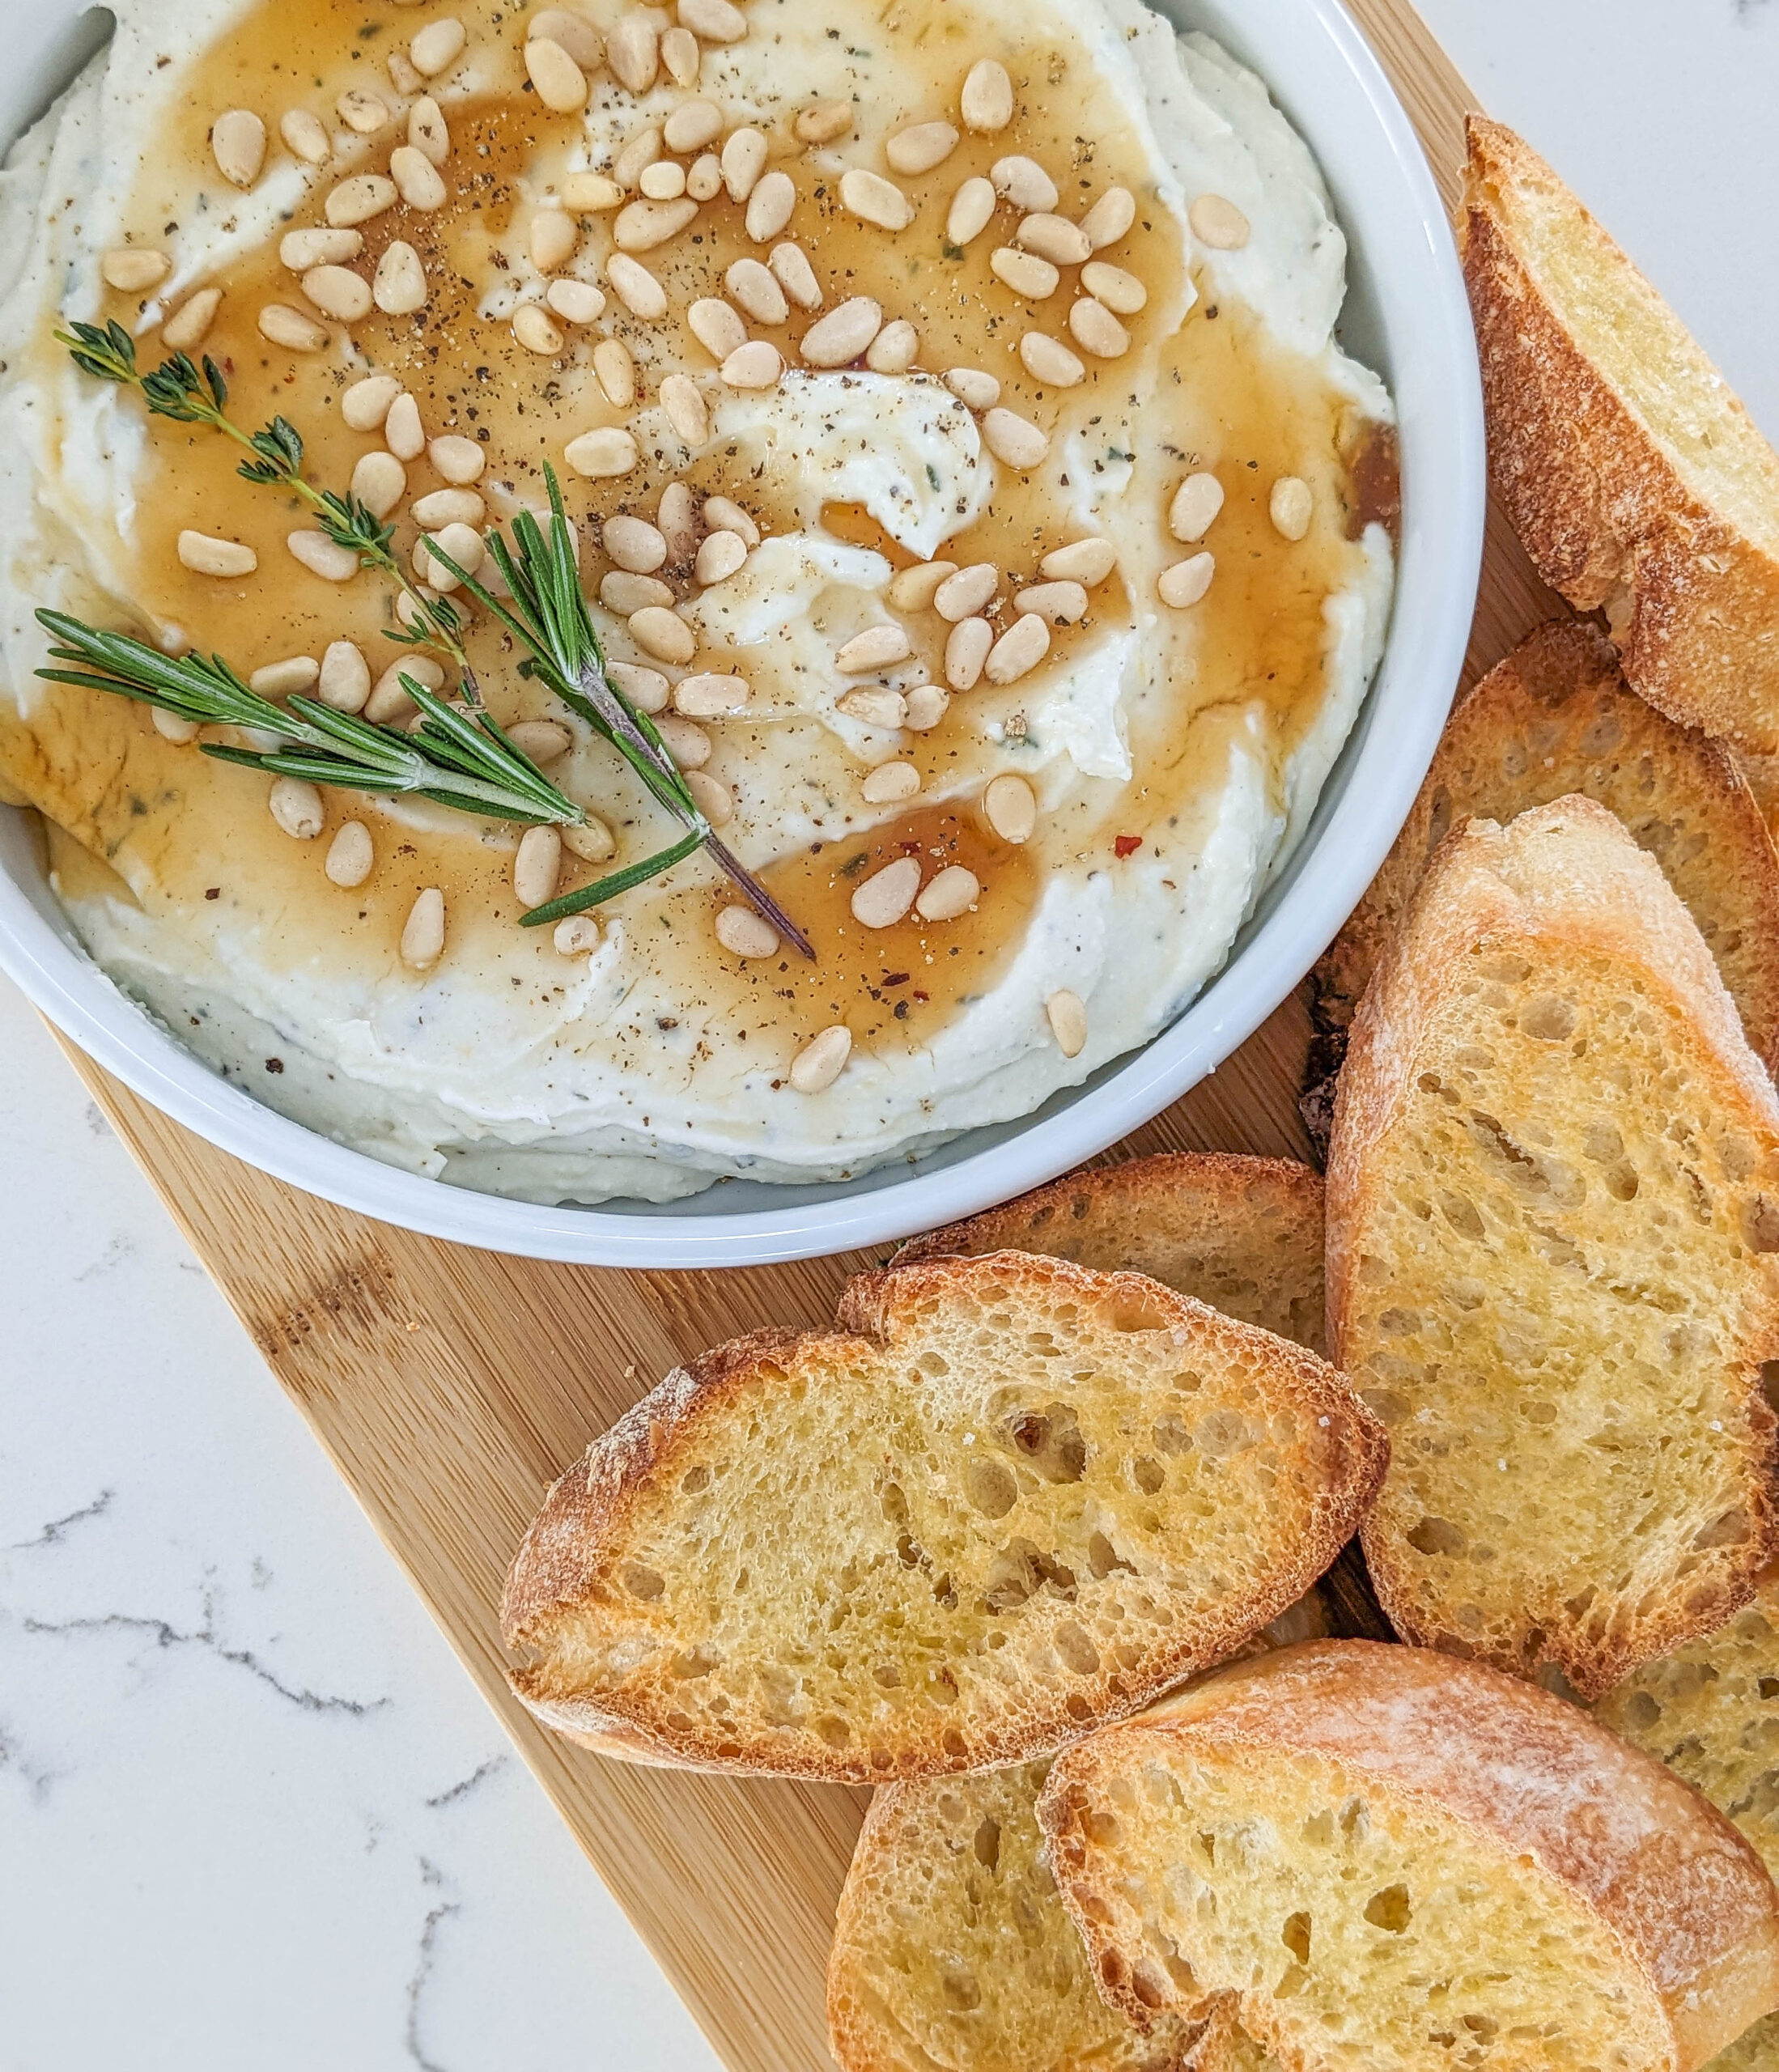 Whipped Ricotta Dip with Hot Honey